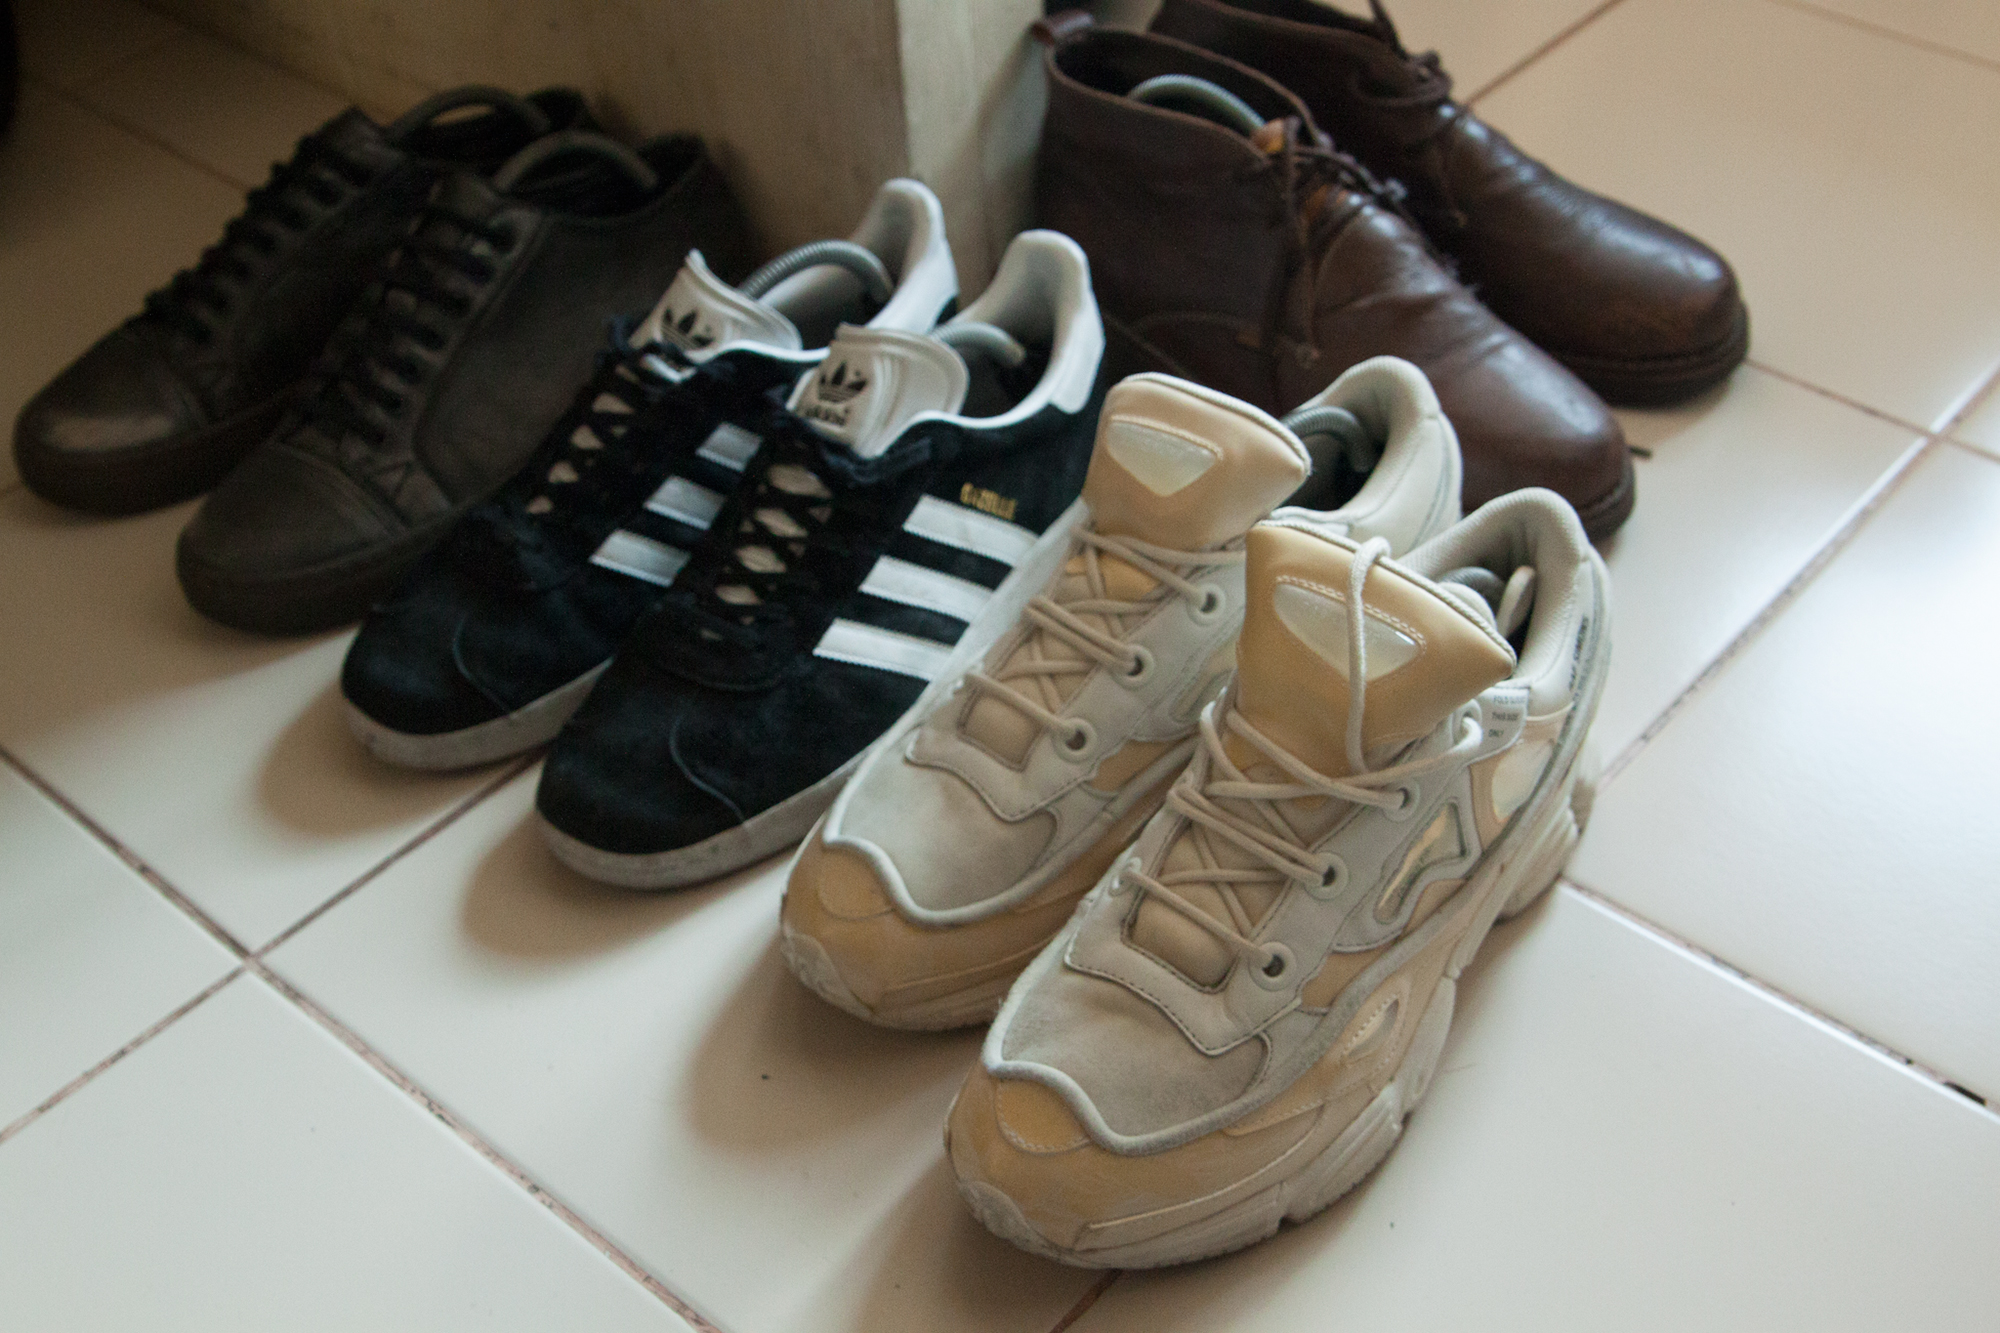 Some from Jack’s sneakers rotation, including the Gazelle and Ozweego. PHOTO © JED GREGORIO